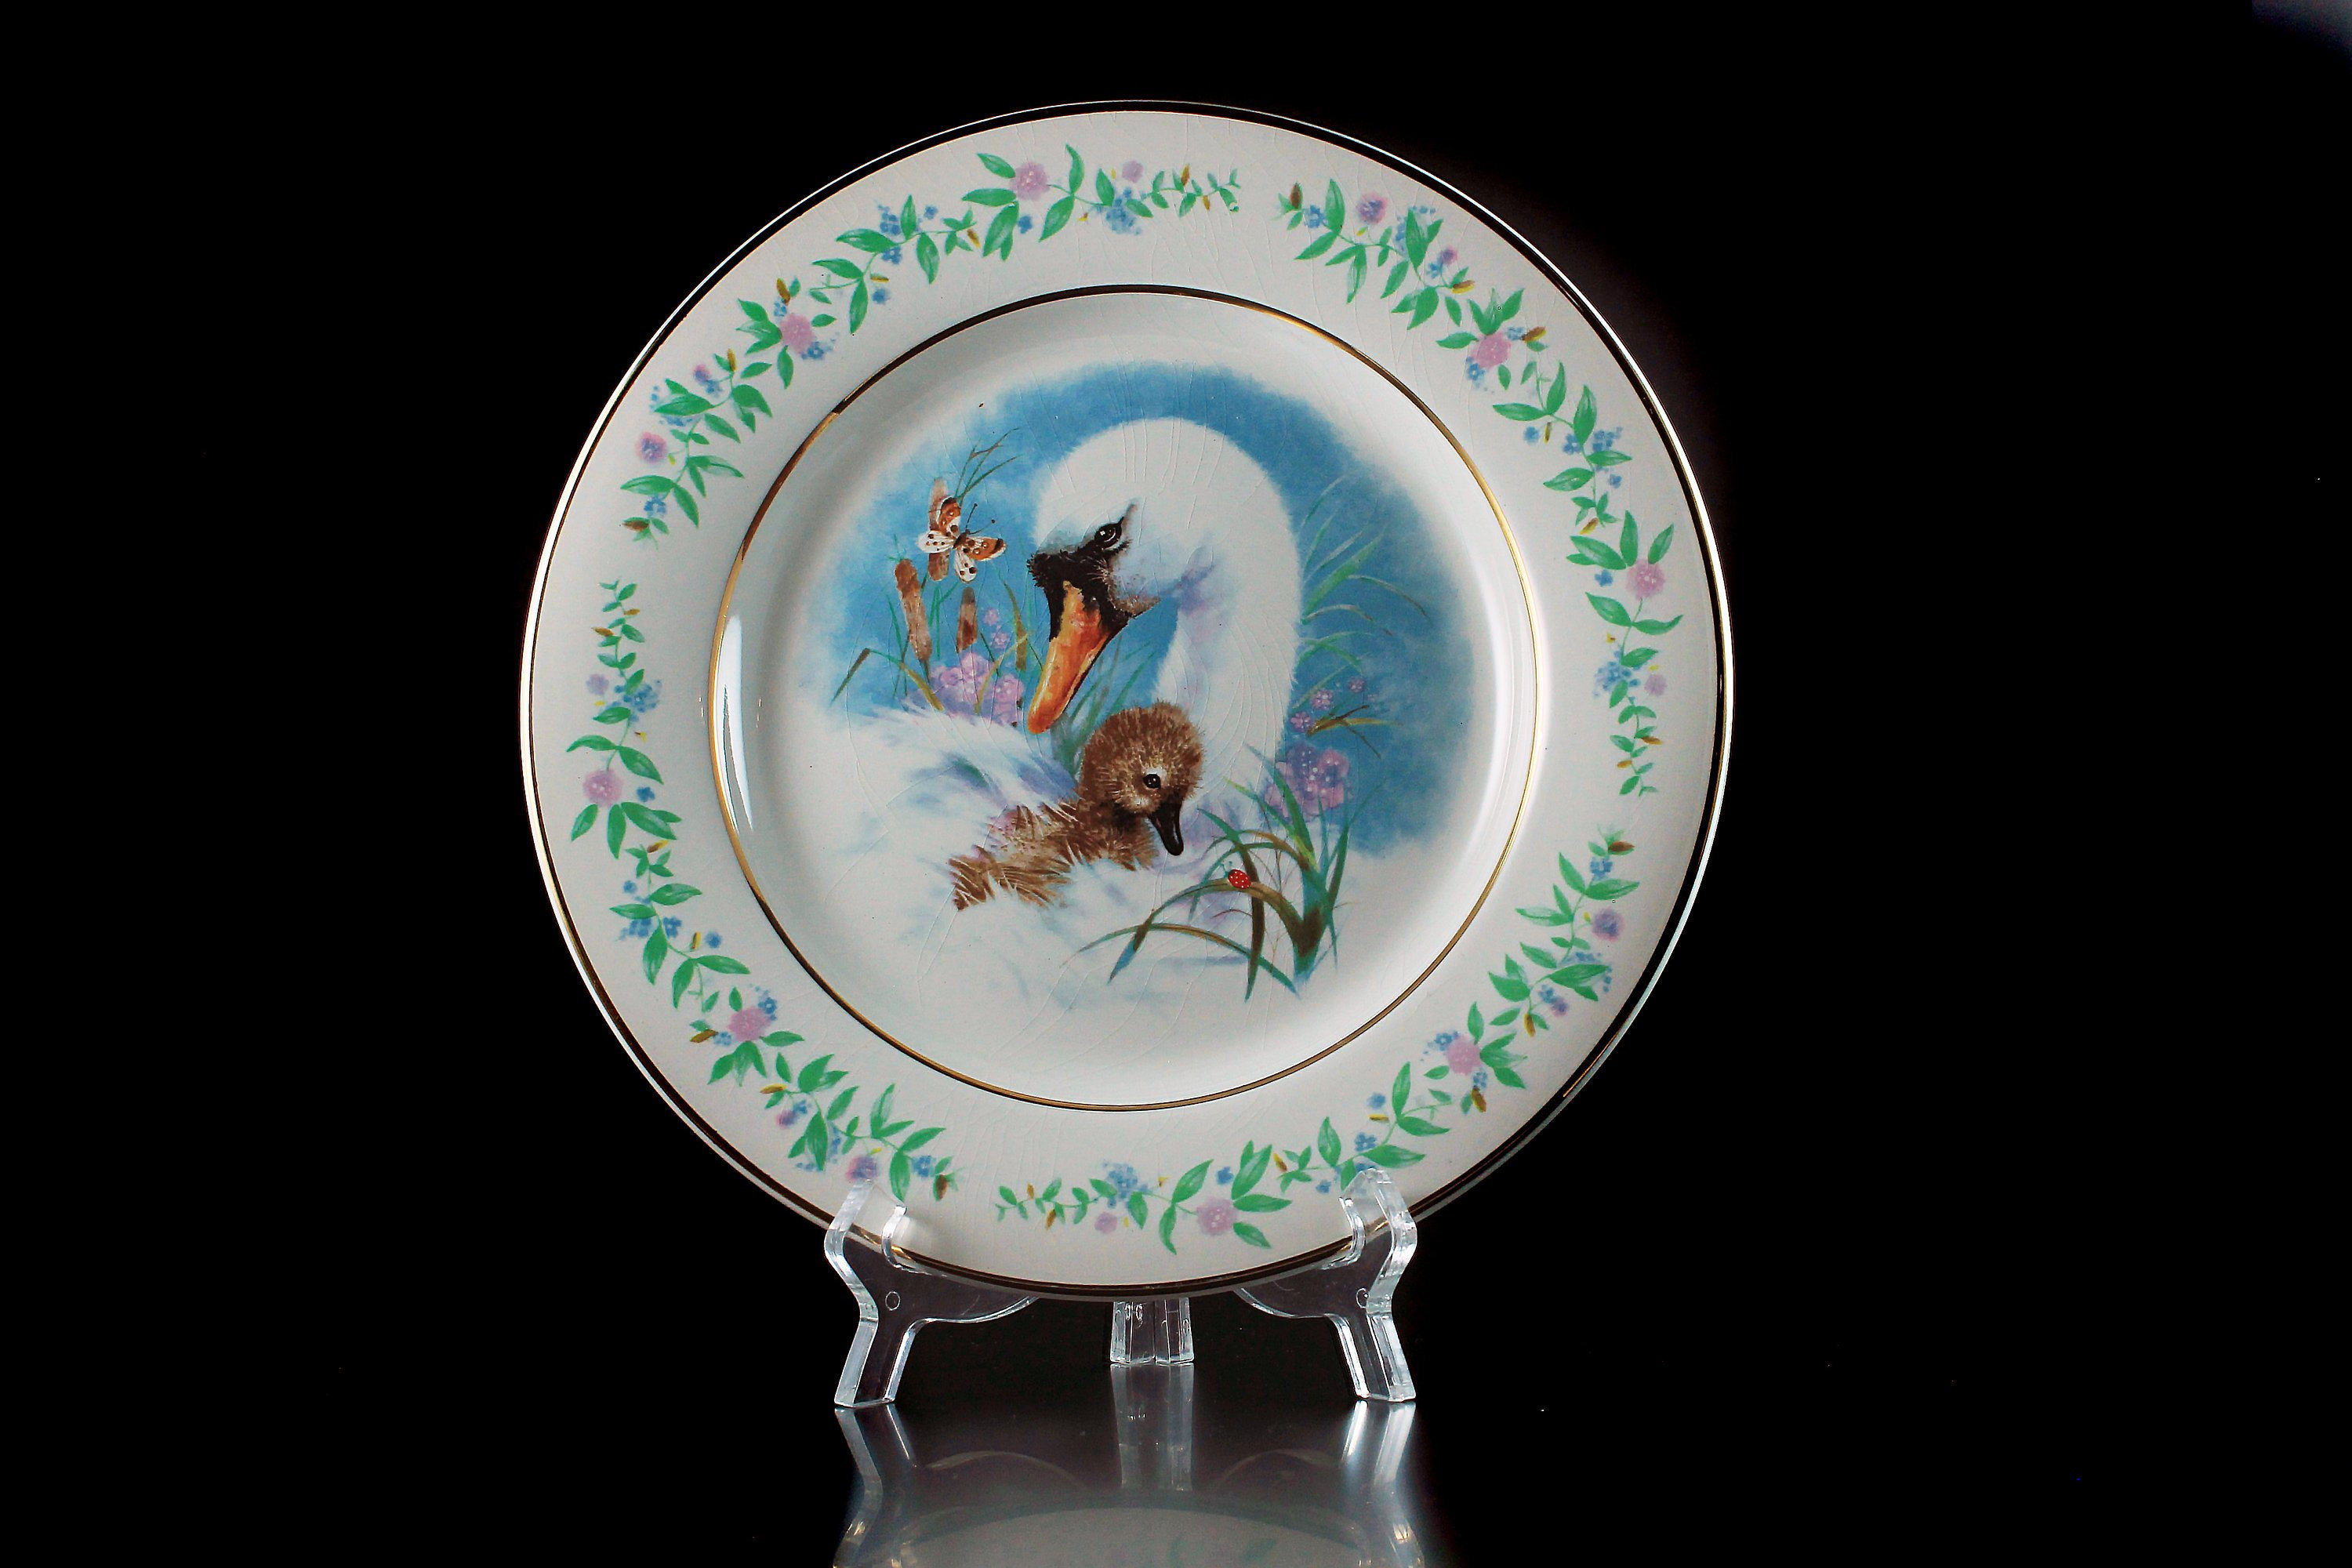 1975 Collectible Plate Avon Wedgwood Gentle Moments Display